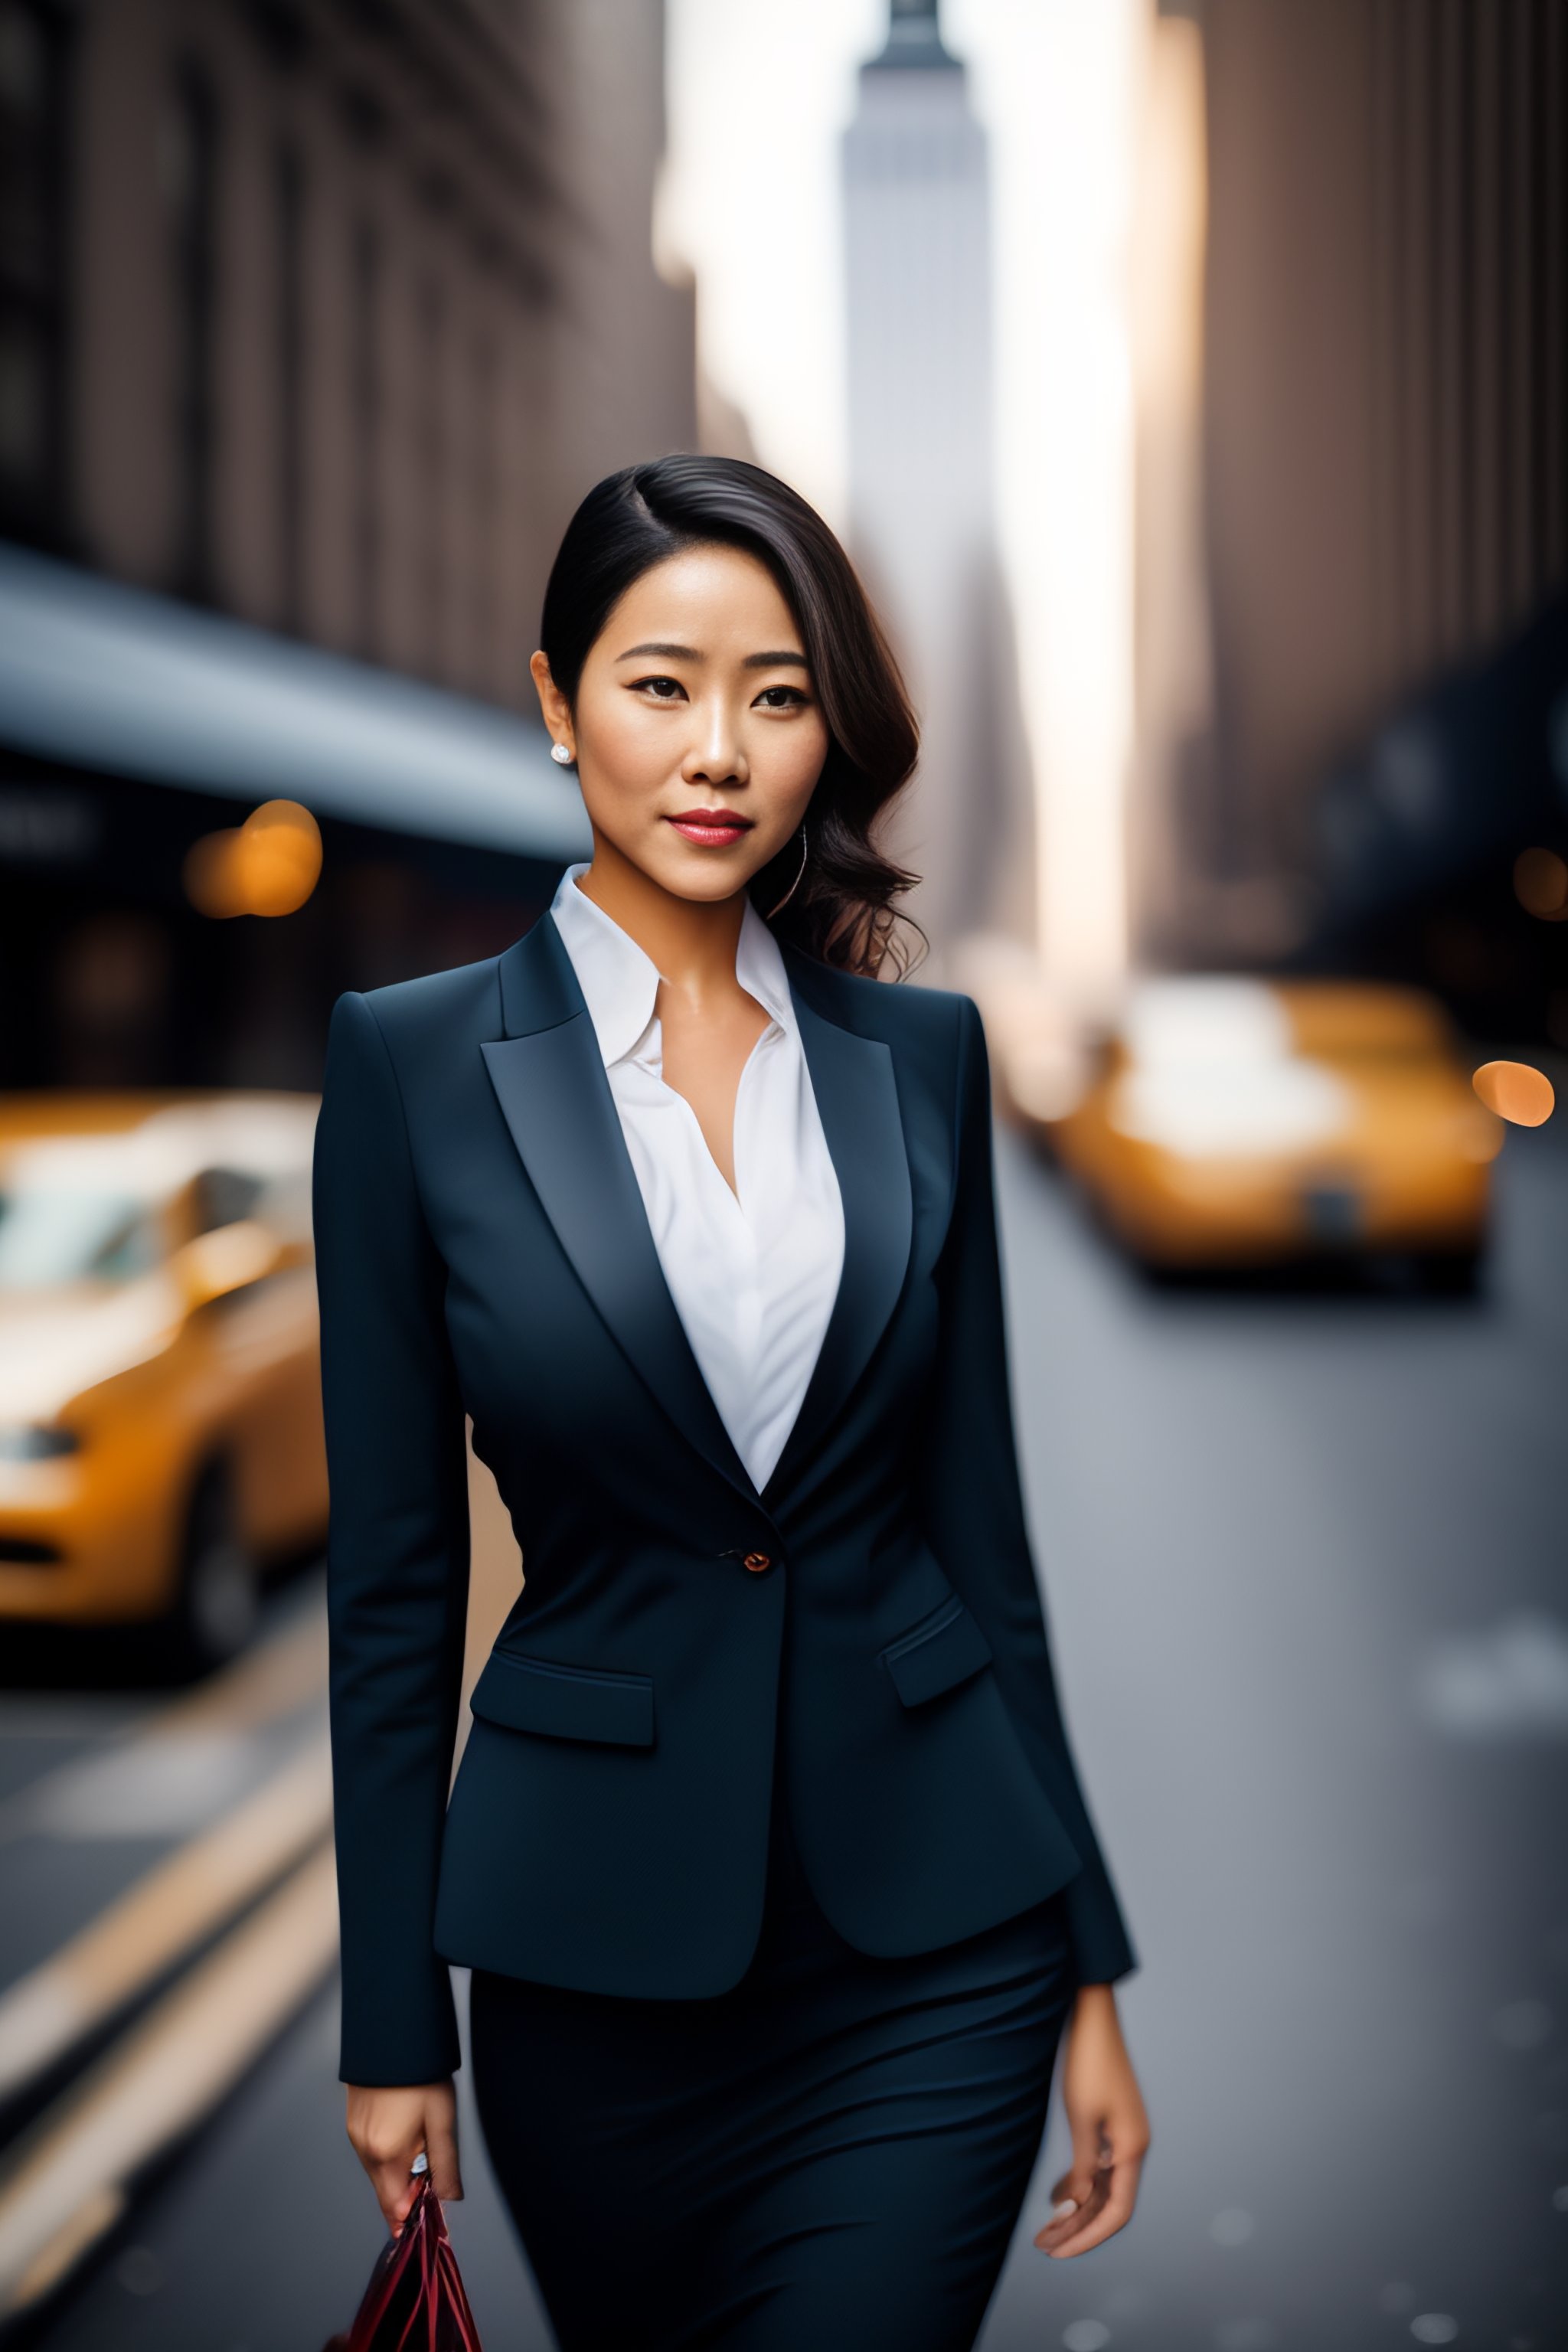 Lexica - Create a realistic picture of a beautiful woman dressed in business  attire in new york city